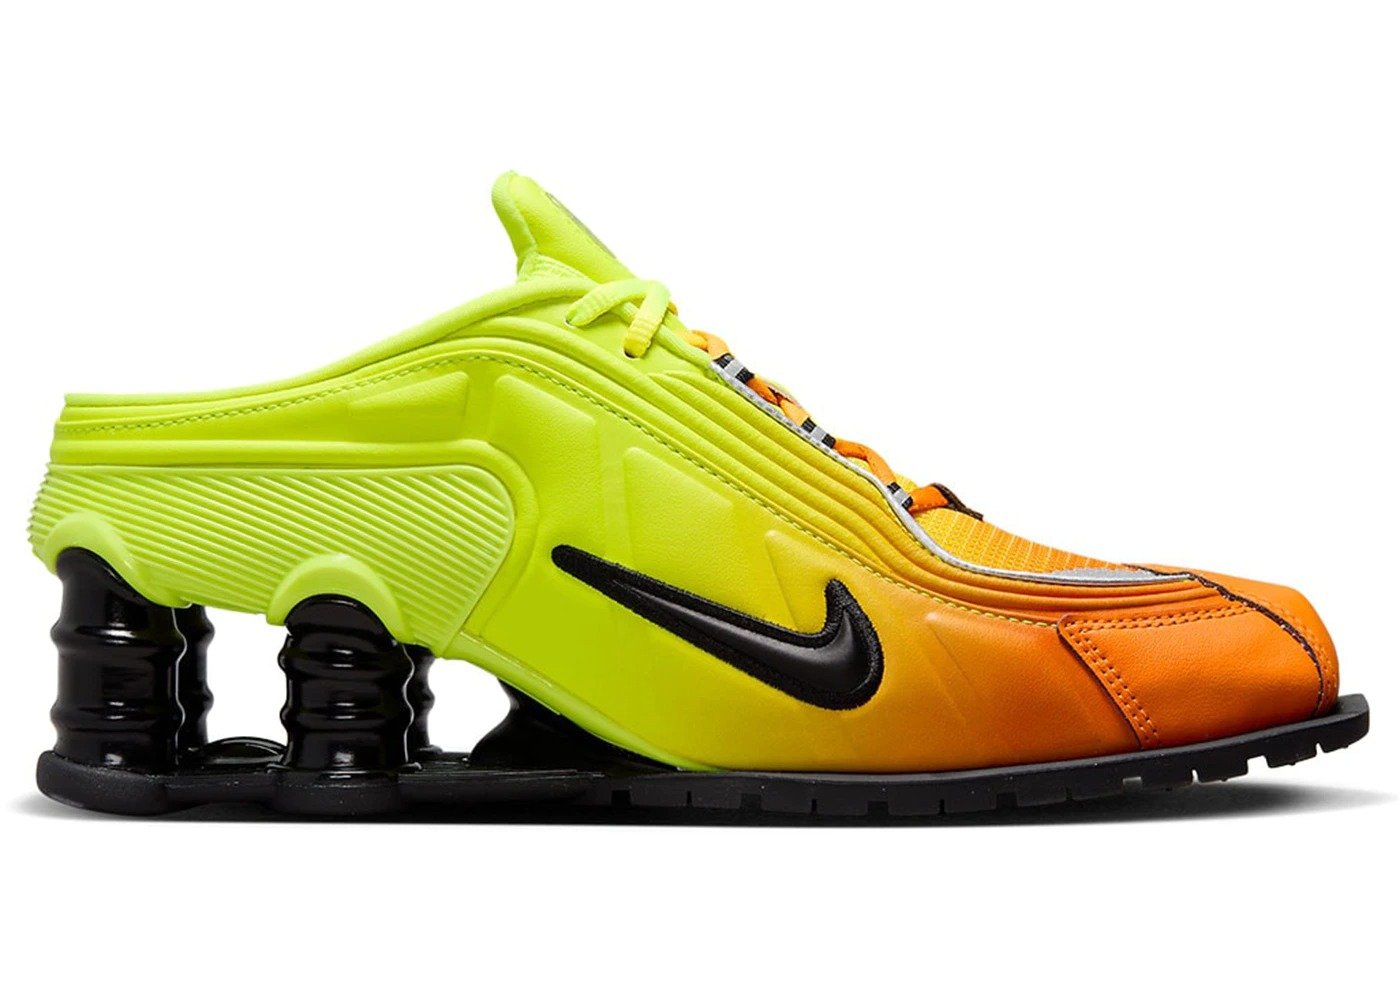 Now Available: Martine Rose x Nike Shox MR4 